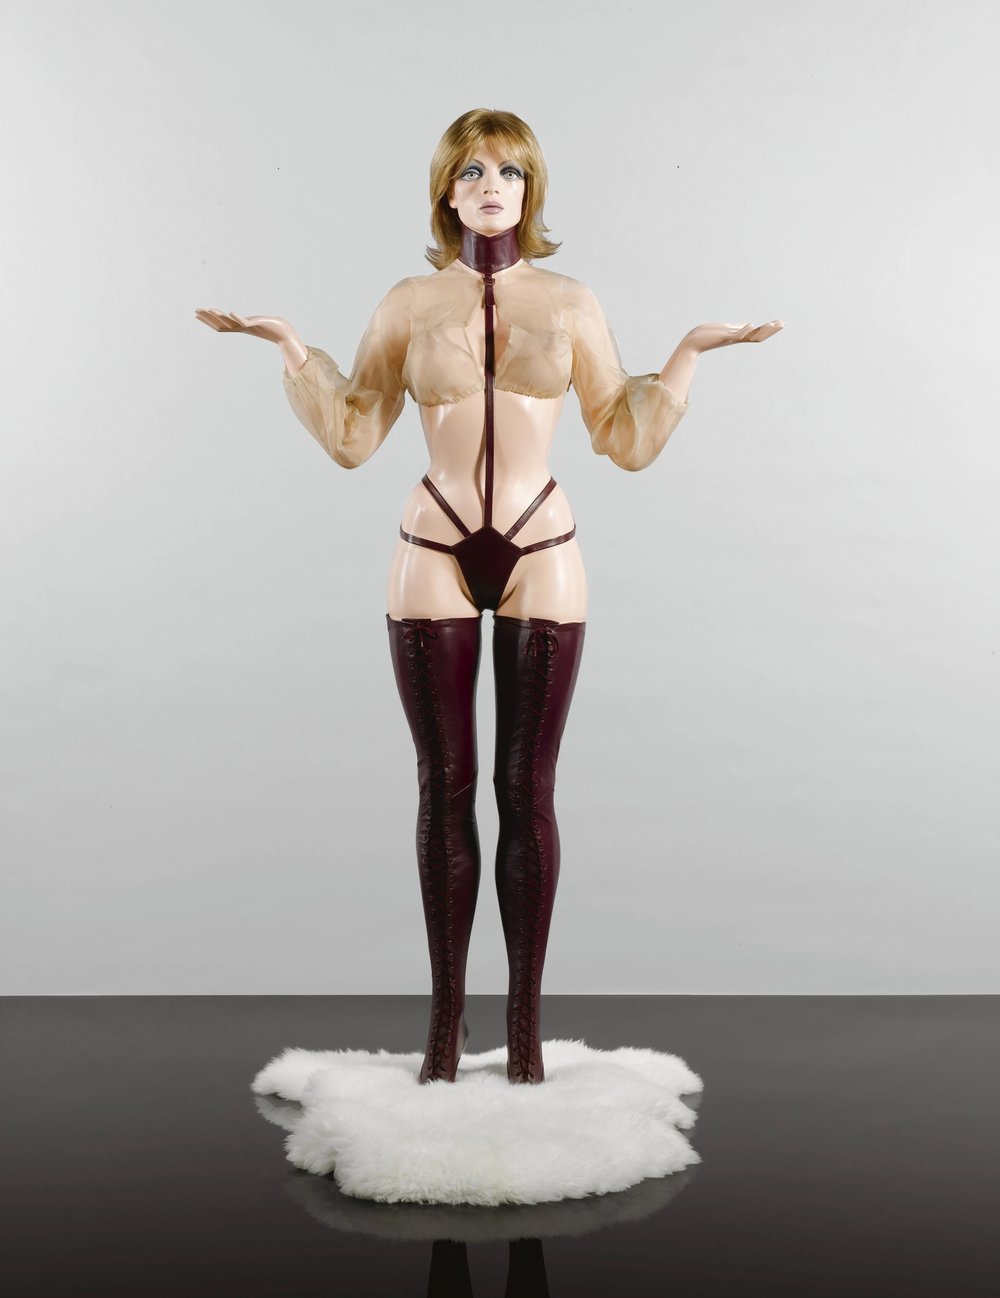 "Hatstand," 1969. Sold at auction for £780,450